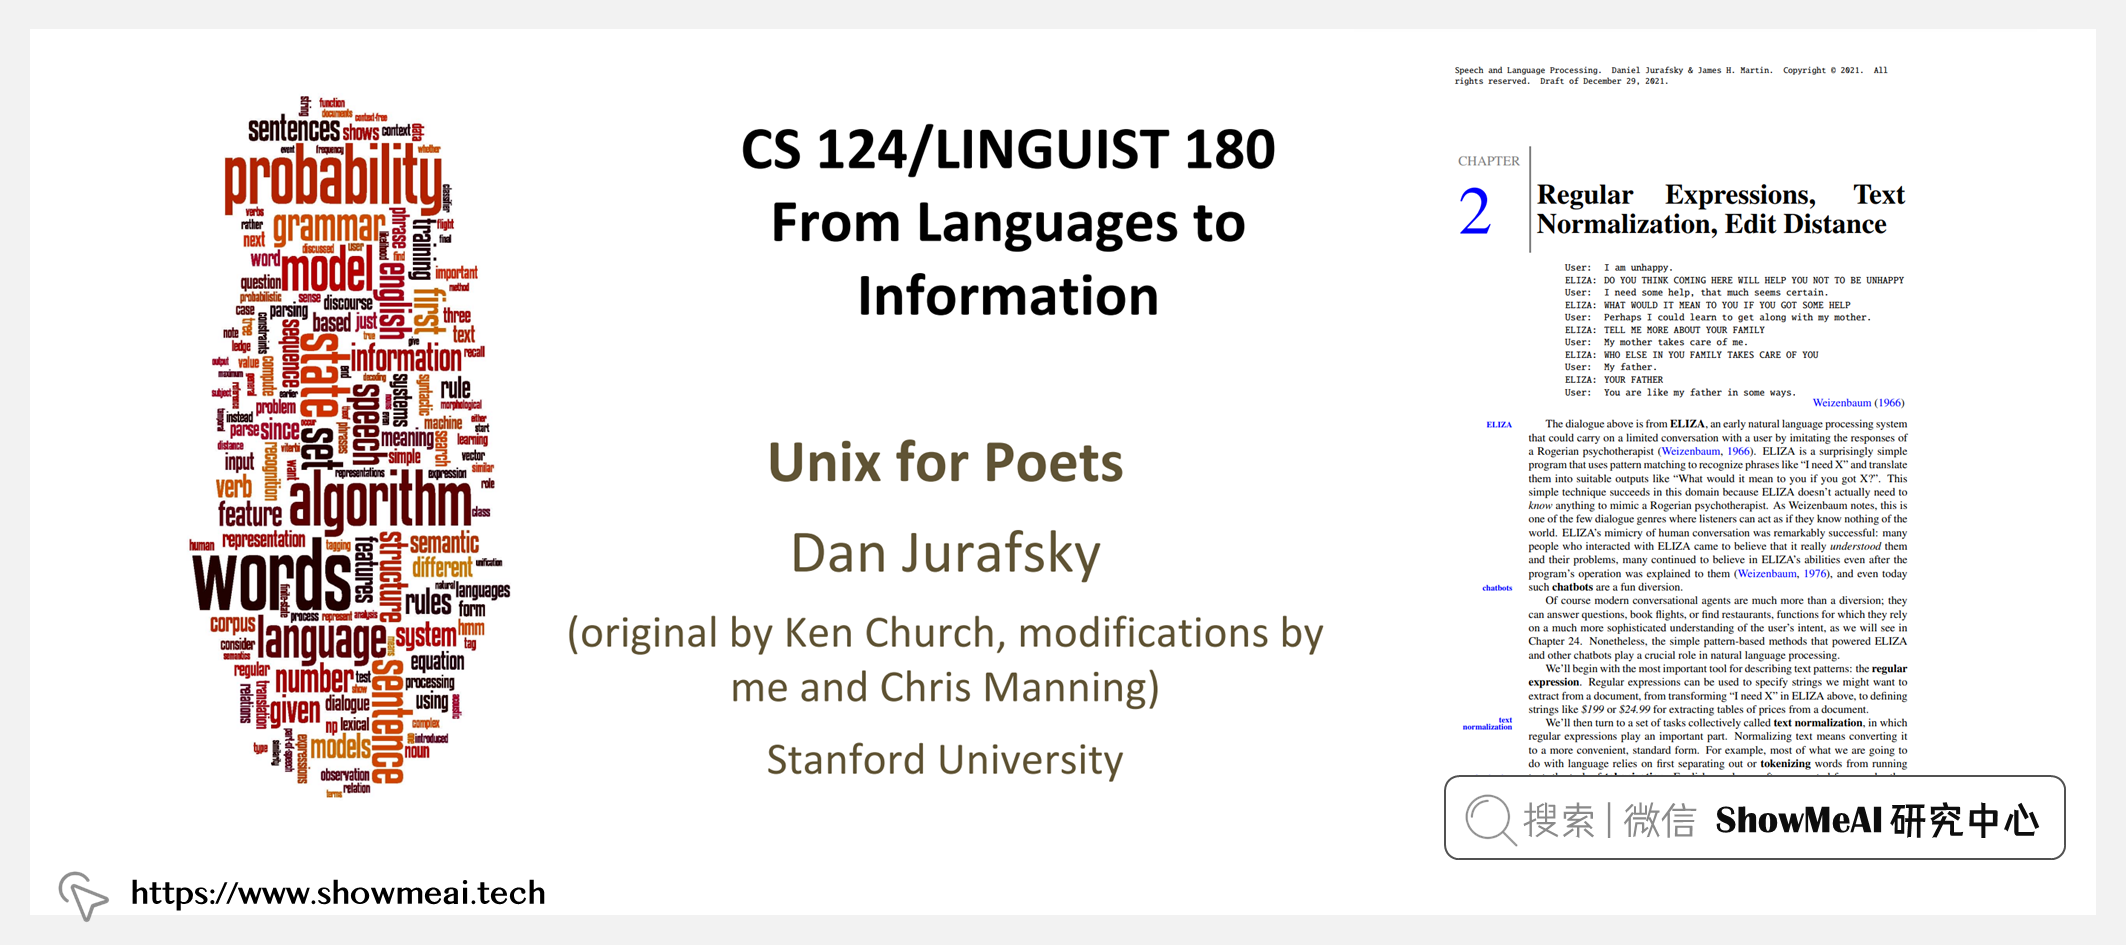 CS124; From Languages to Information; 从语言到信息